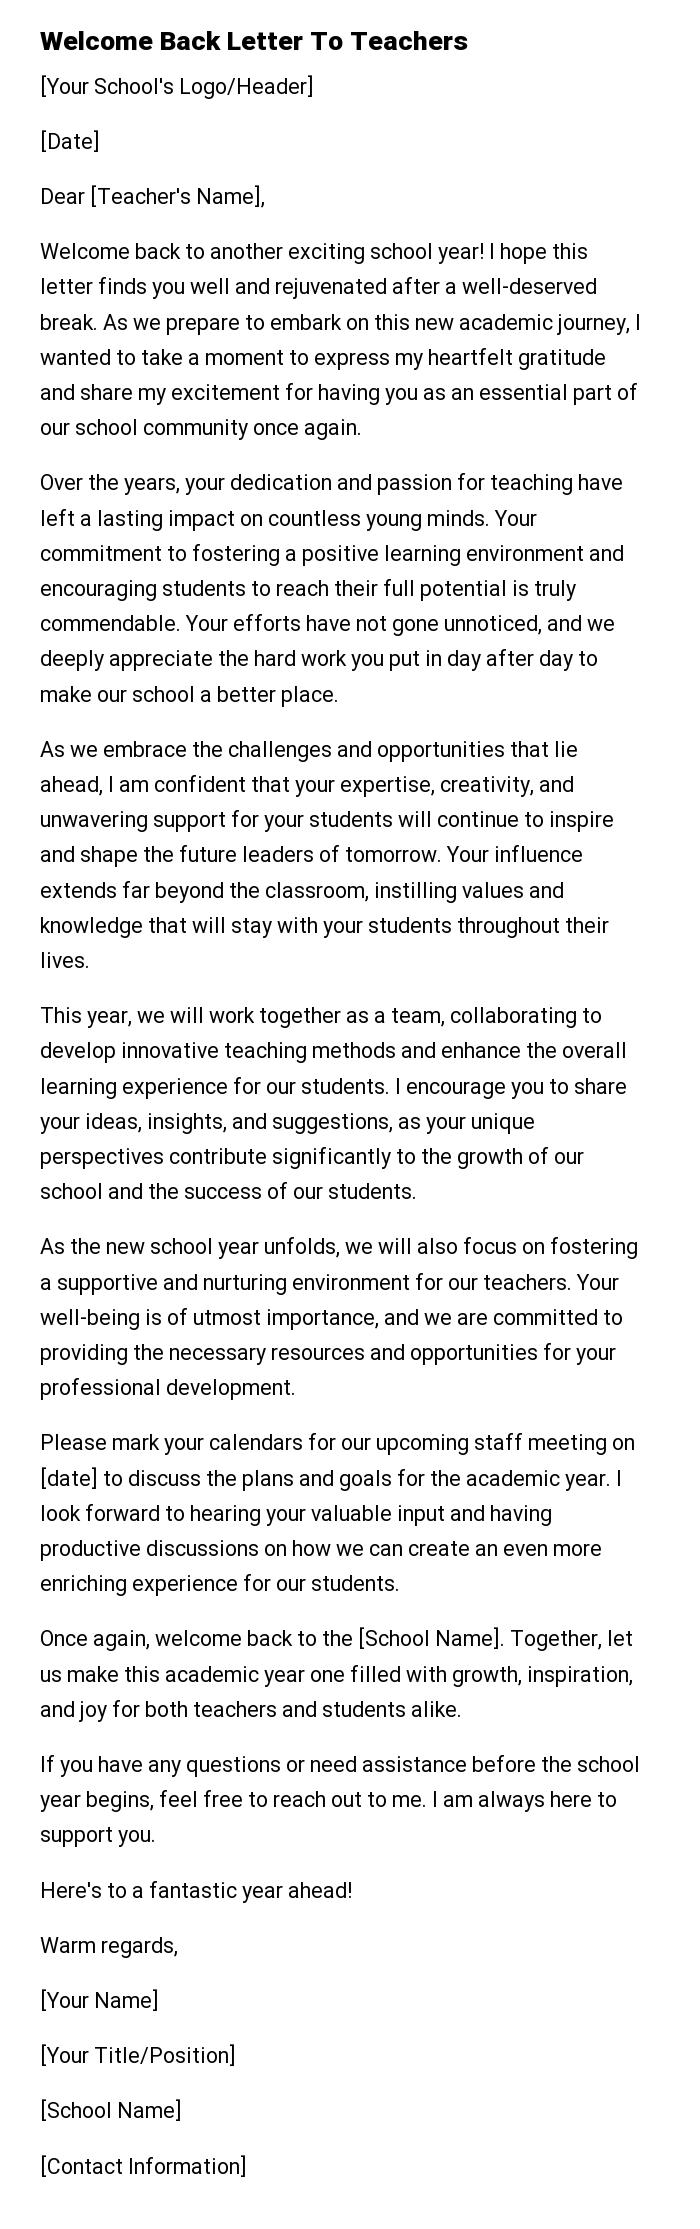 Welcome Back Letter To Teachers